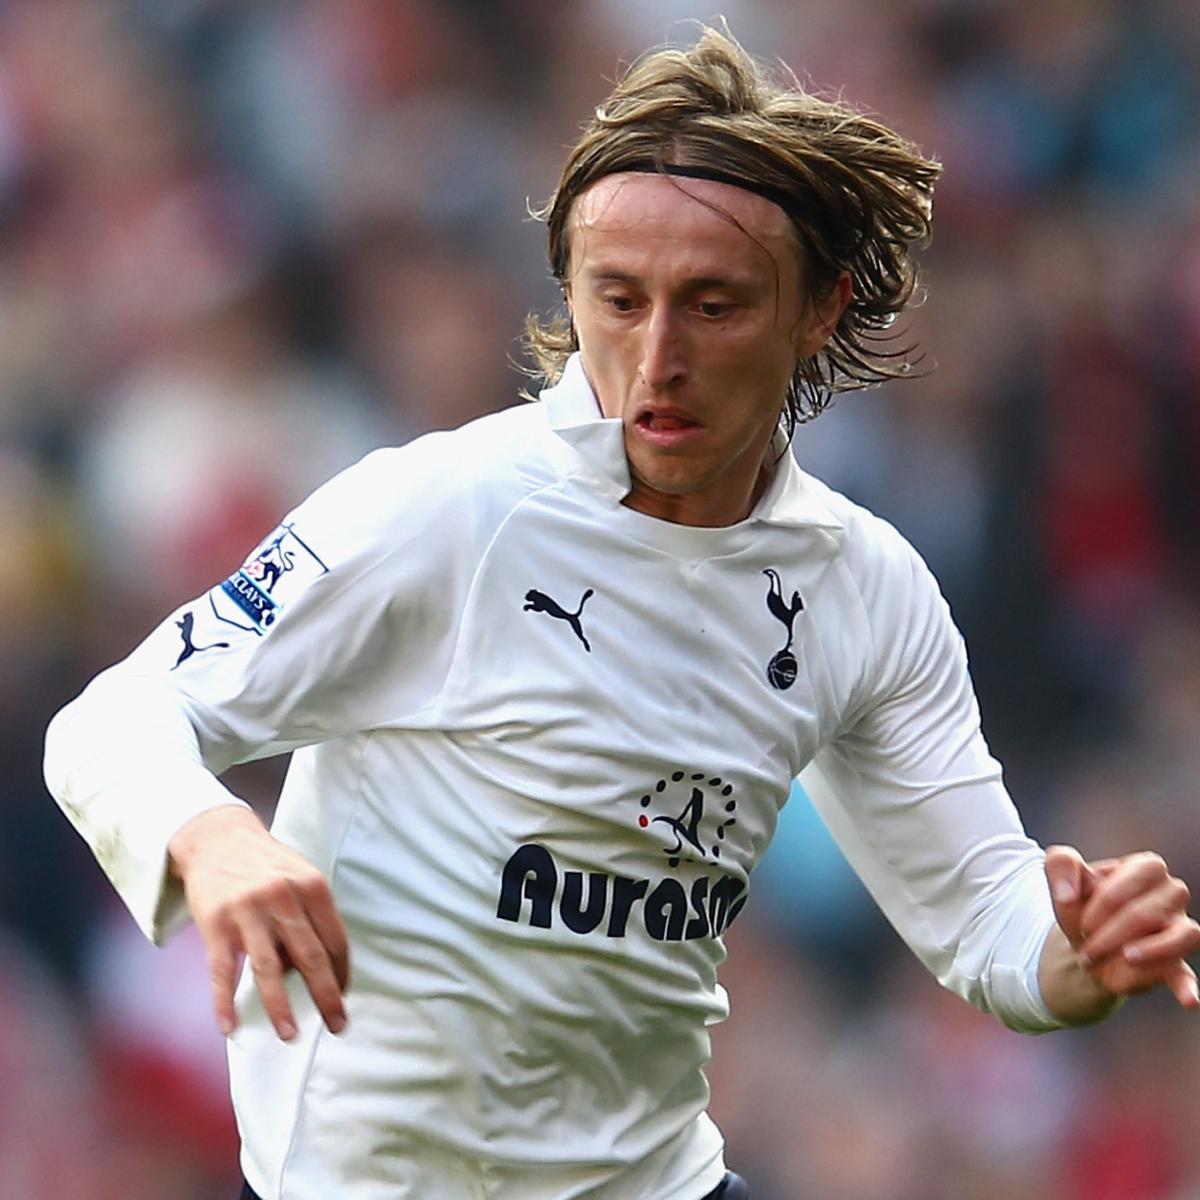 Real Madrid Transfers: Why Tottenham's Luka Modric Would Not Be a Good